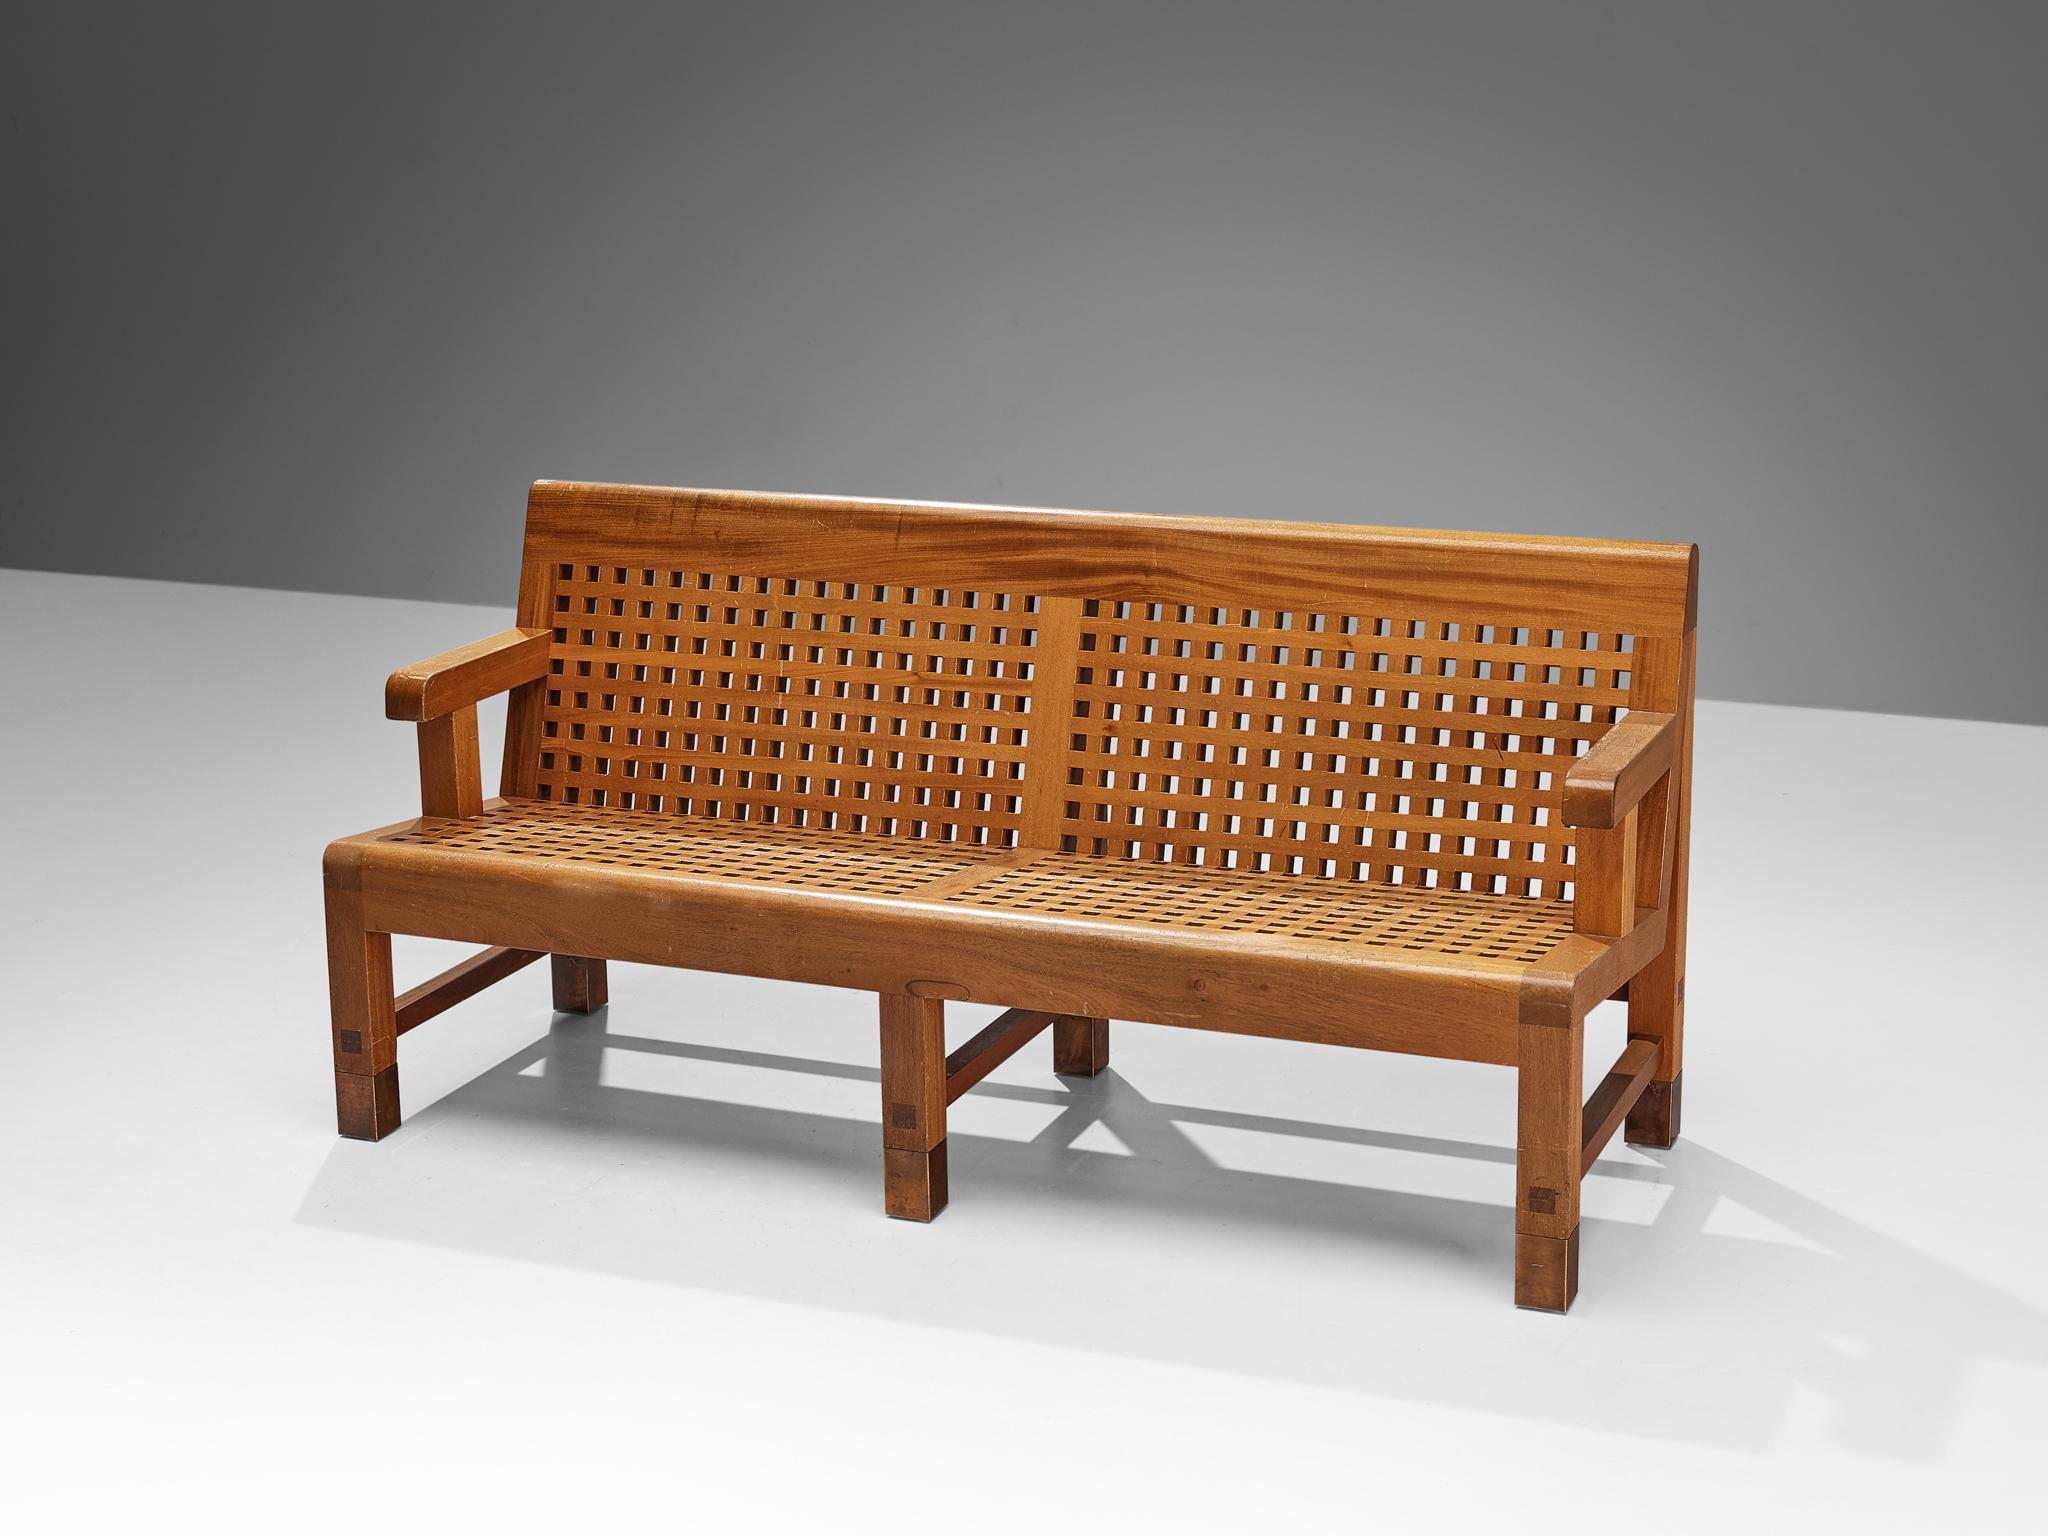 Bench or sofa, mahogany, copper feet, Scandinavia, 1950s

Interesting Scandinavian bench build up from laths in mahogany. This bench was made in the 1950s and shows very beautiful detailing, for instance the copper 'feet' on the legs of the bench.